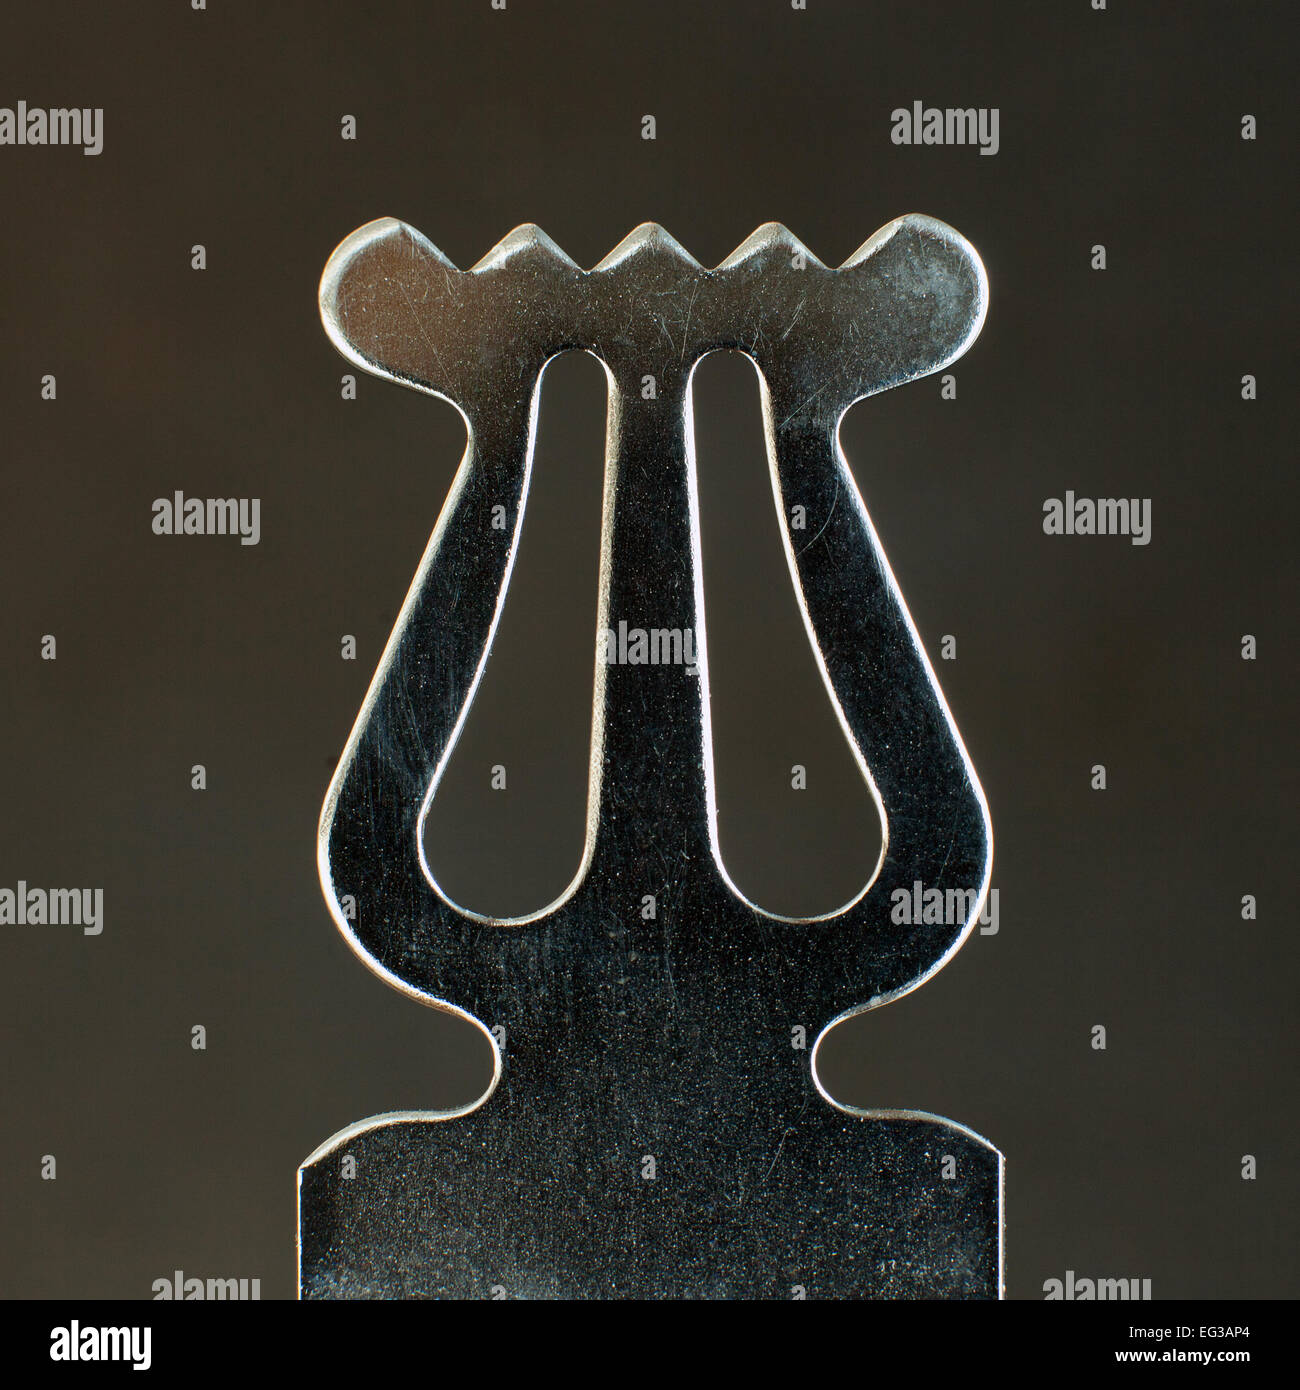 closeup of ornament on old metal music stand against dark background Stock Photo